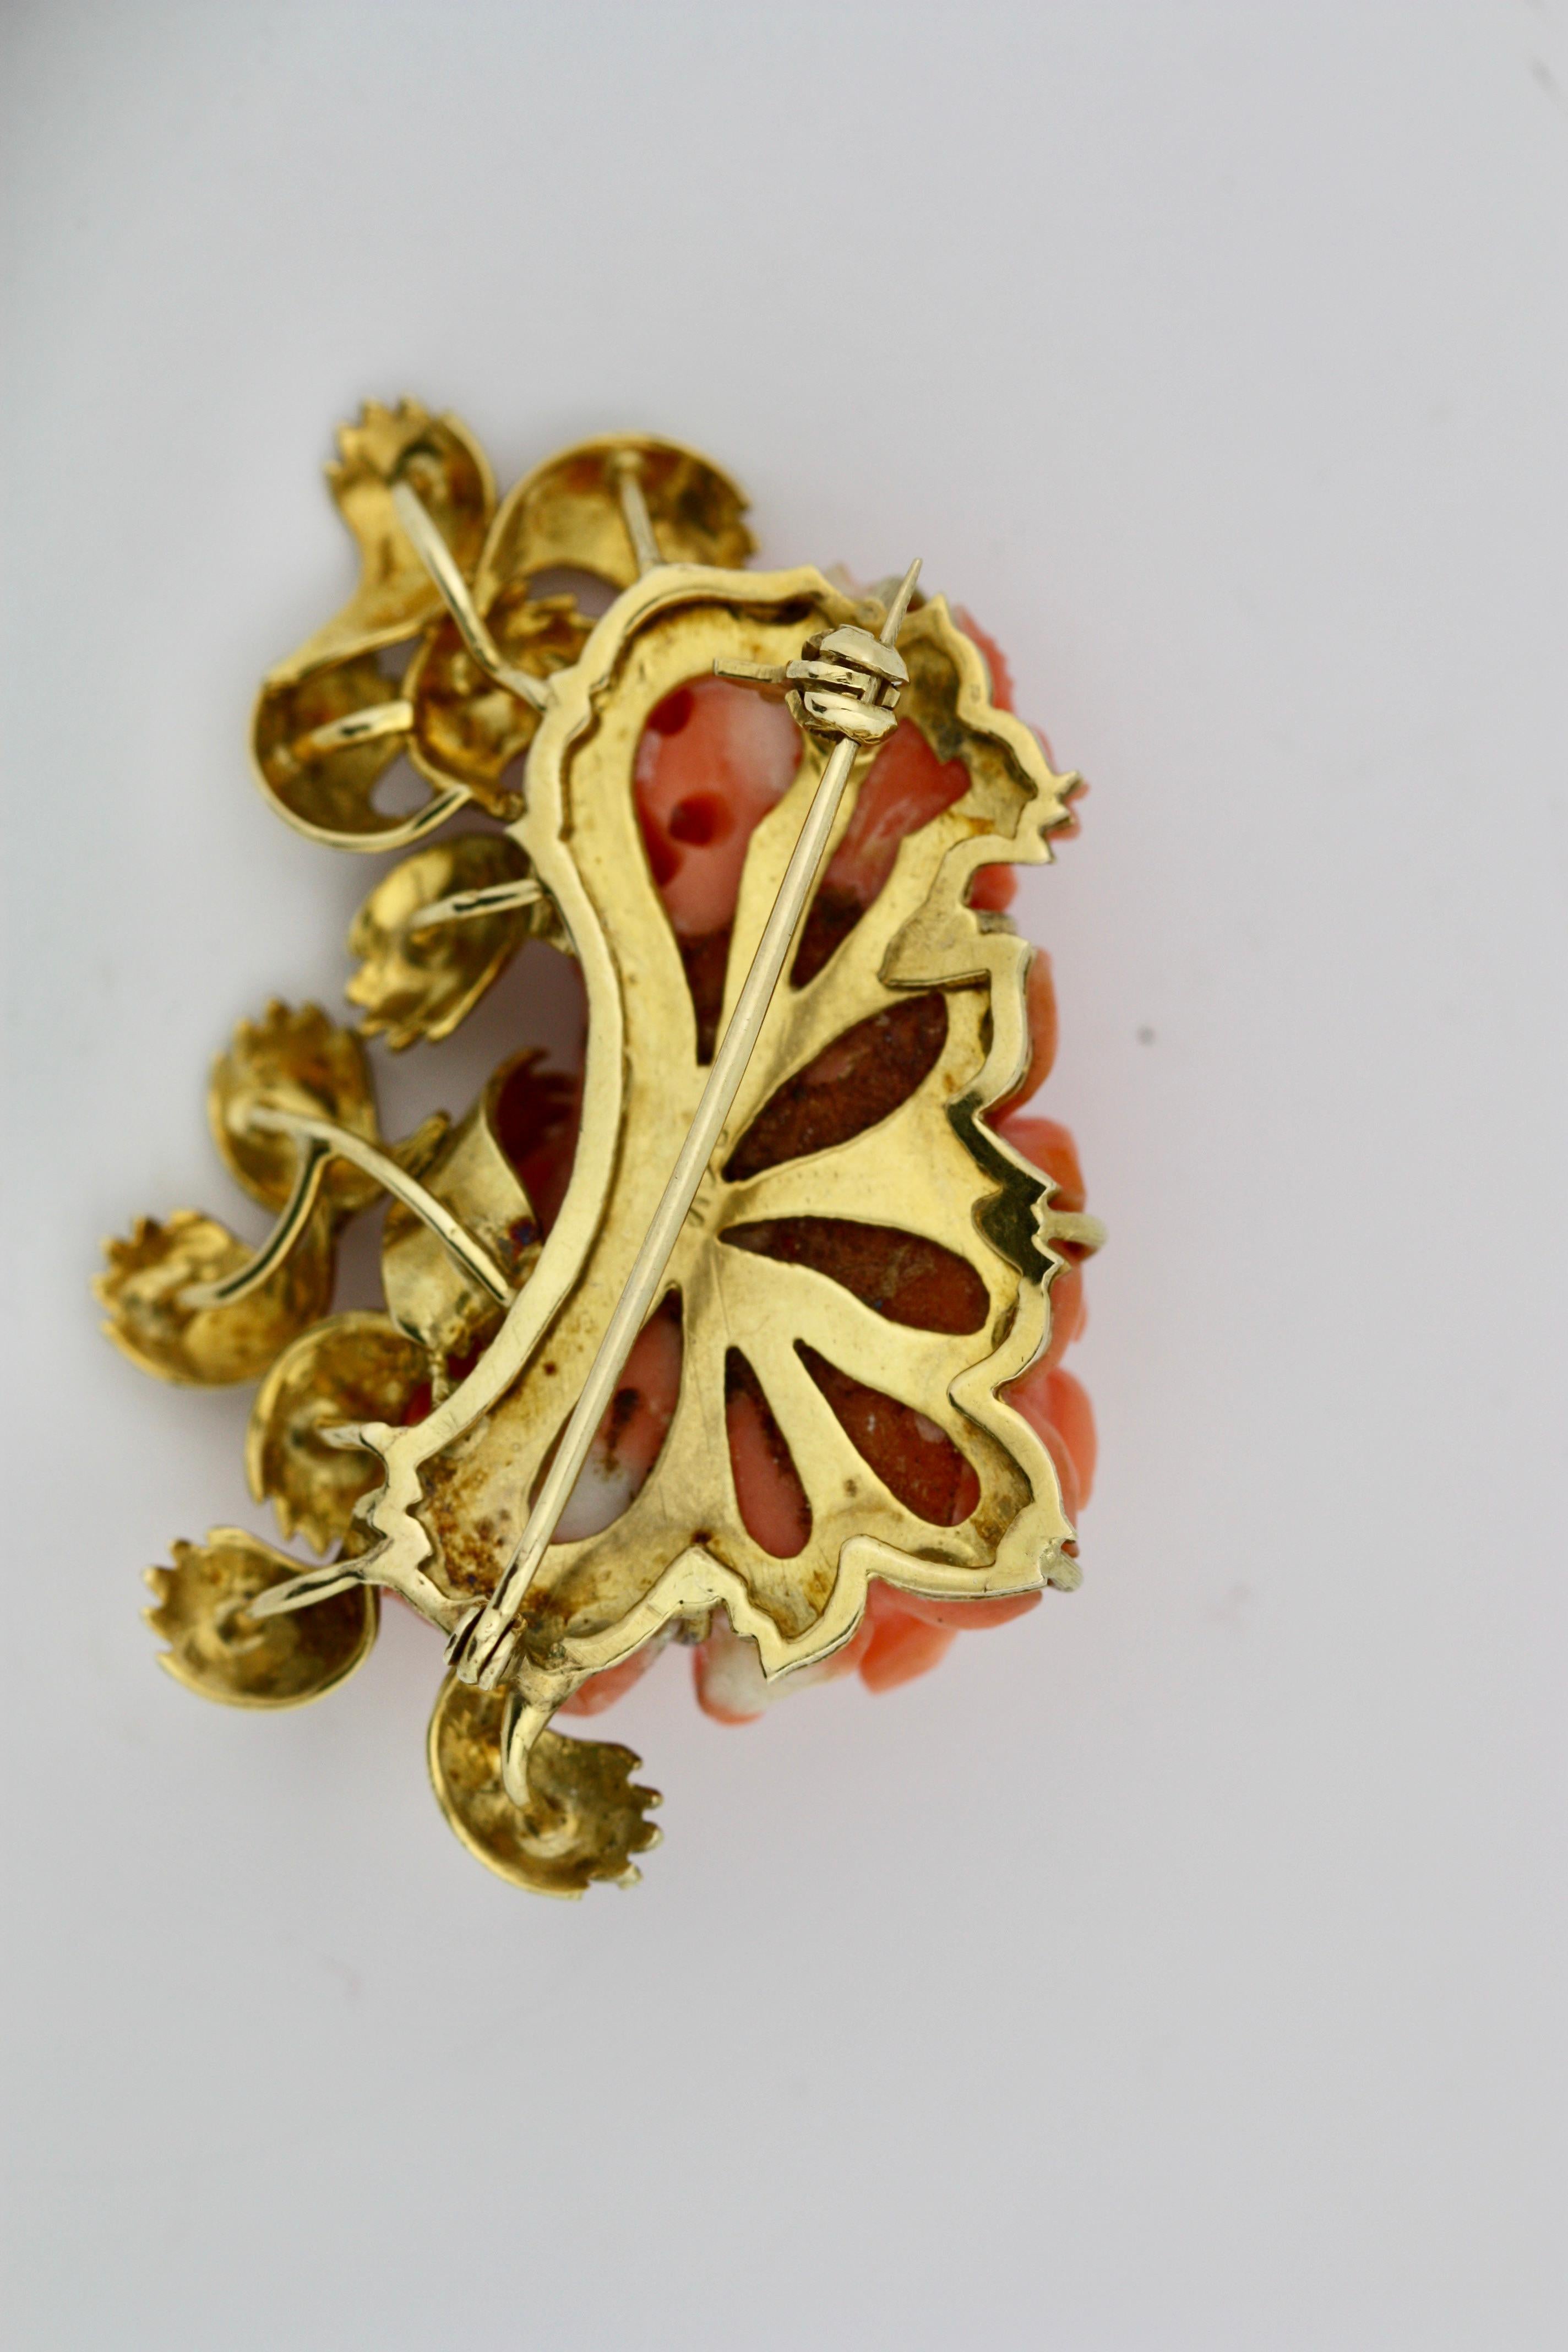 
A carved Coral Brooch
Of a rose motif carved from coral. 
Backed by a gold plaque with brooch attachment.
25 grams (gross) 
length 2 1/4 inches; 